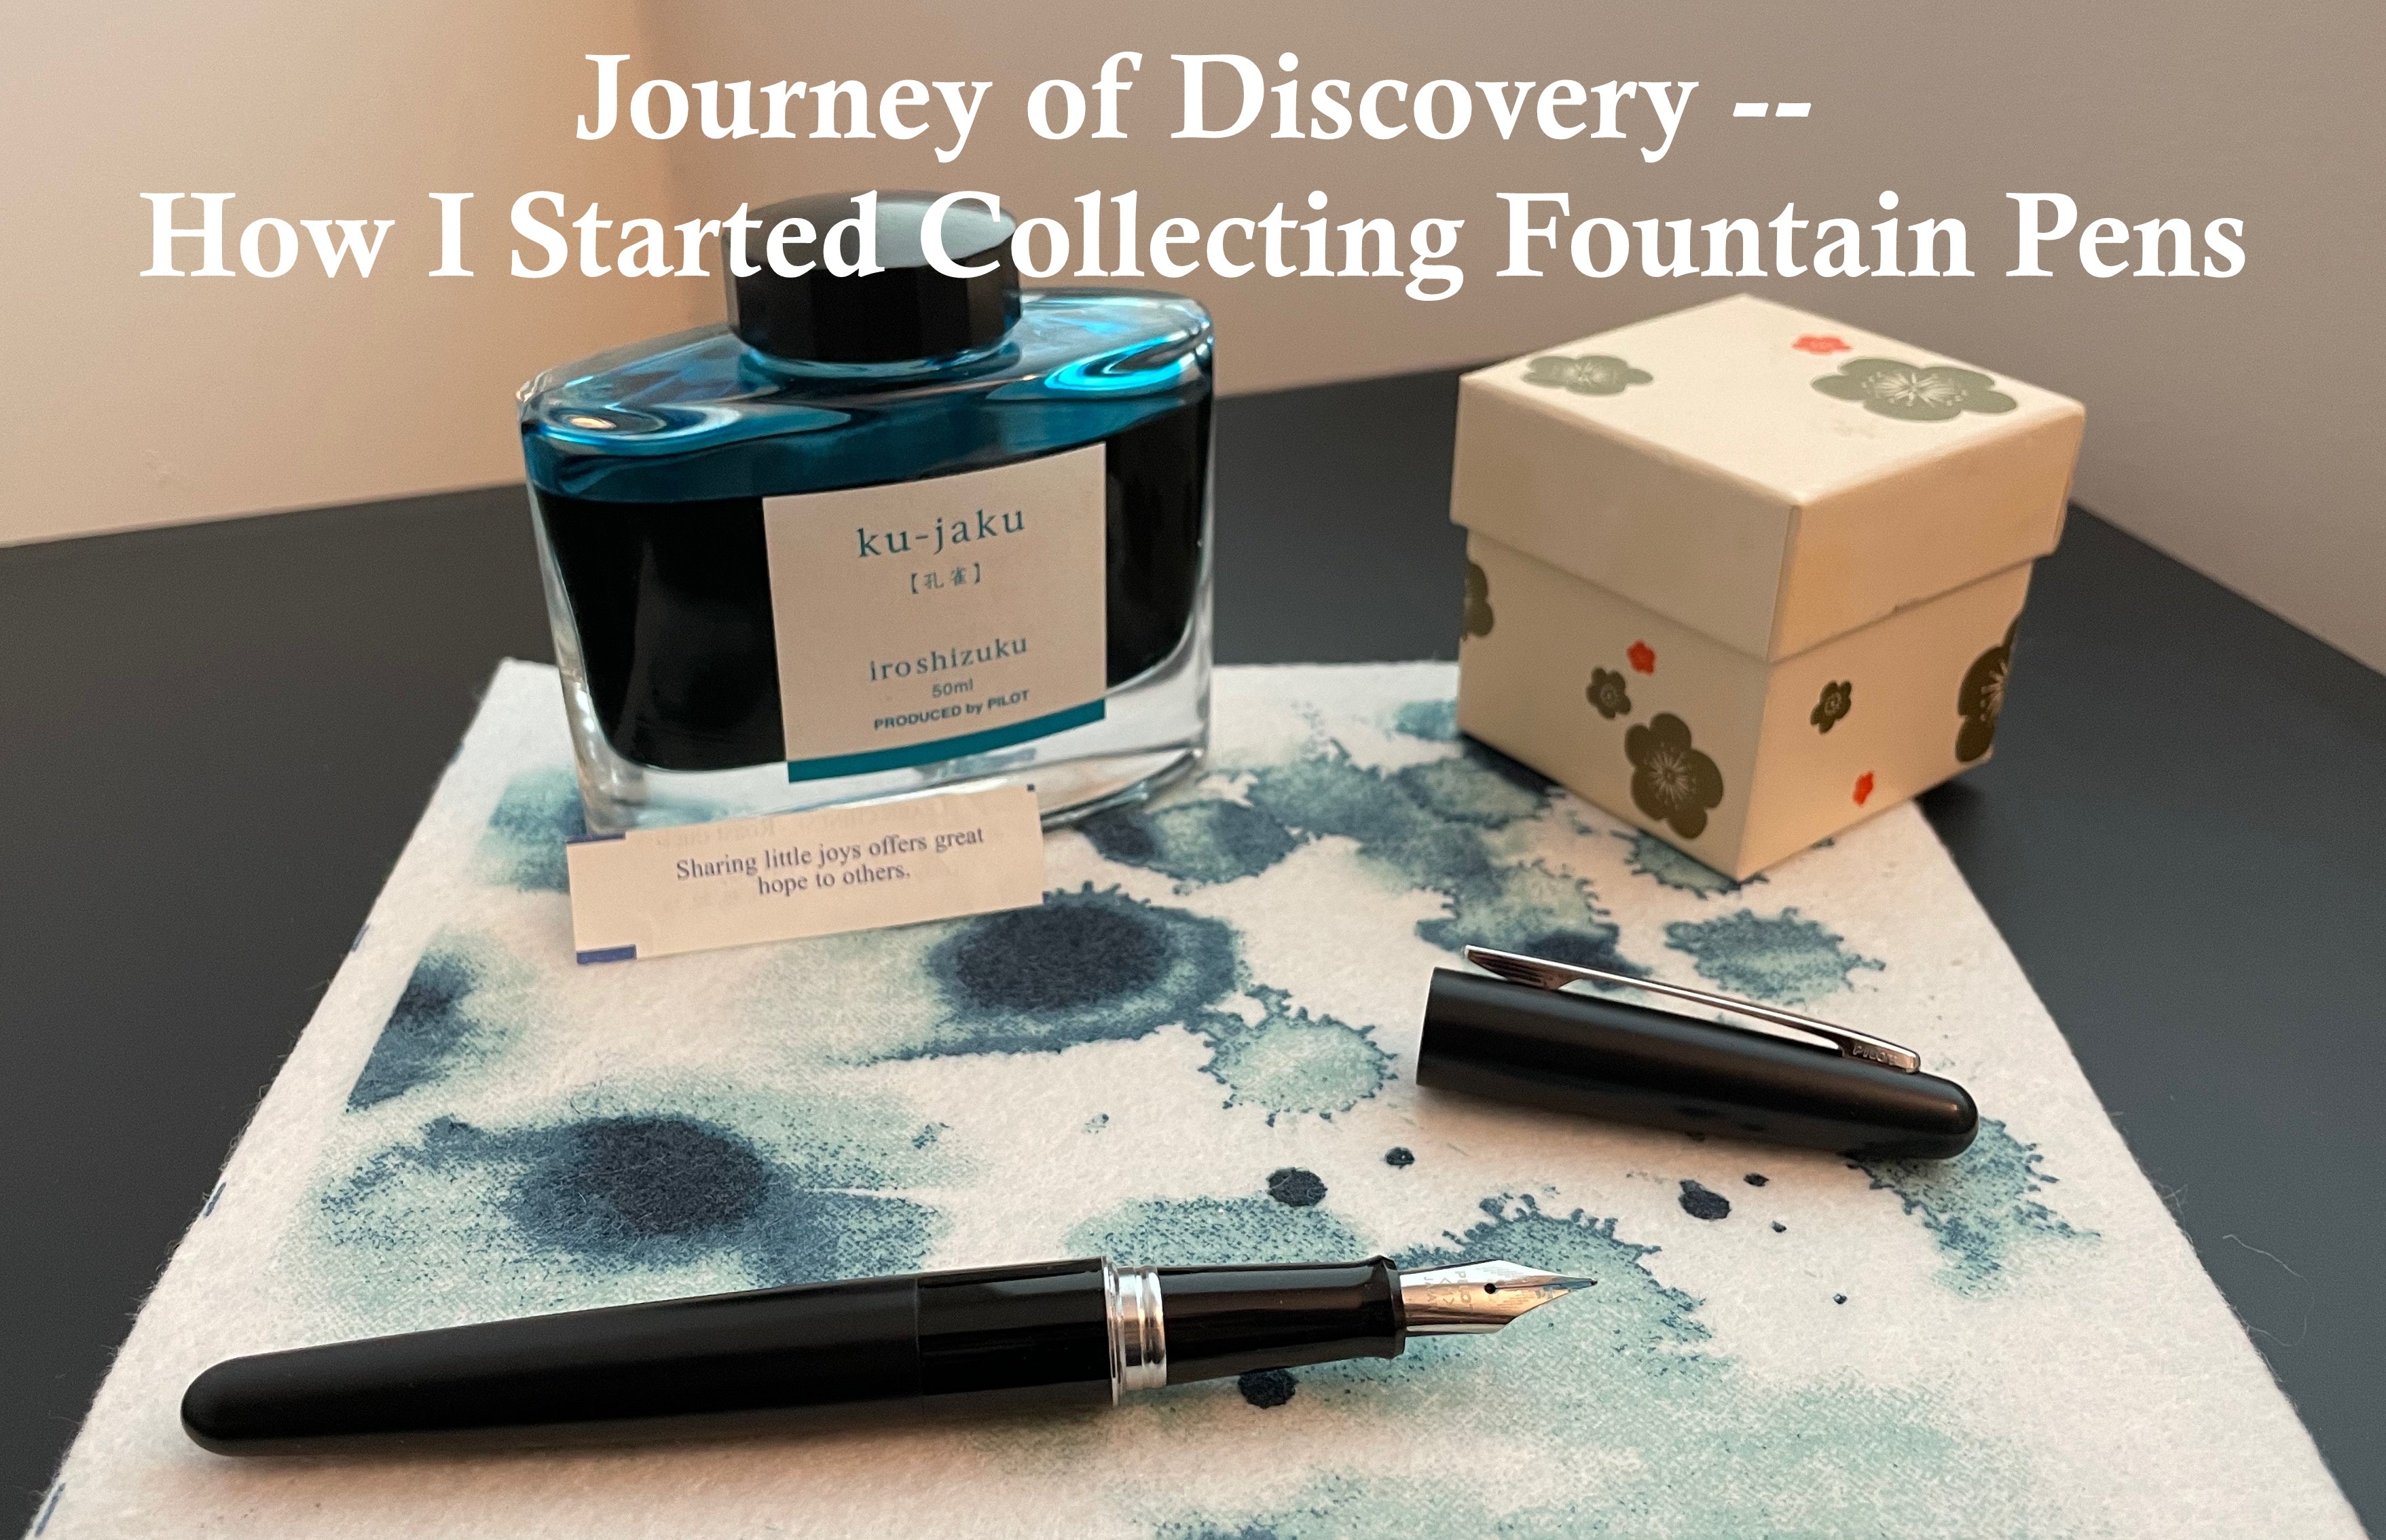 Journey of Discovery - How I Started Collecting Fountain Pens